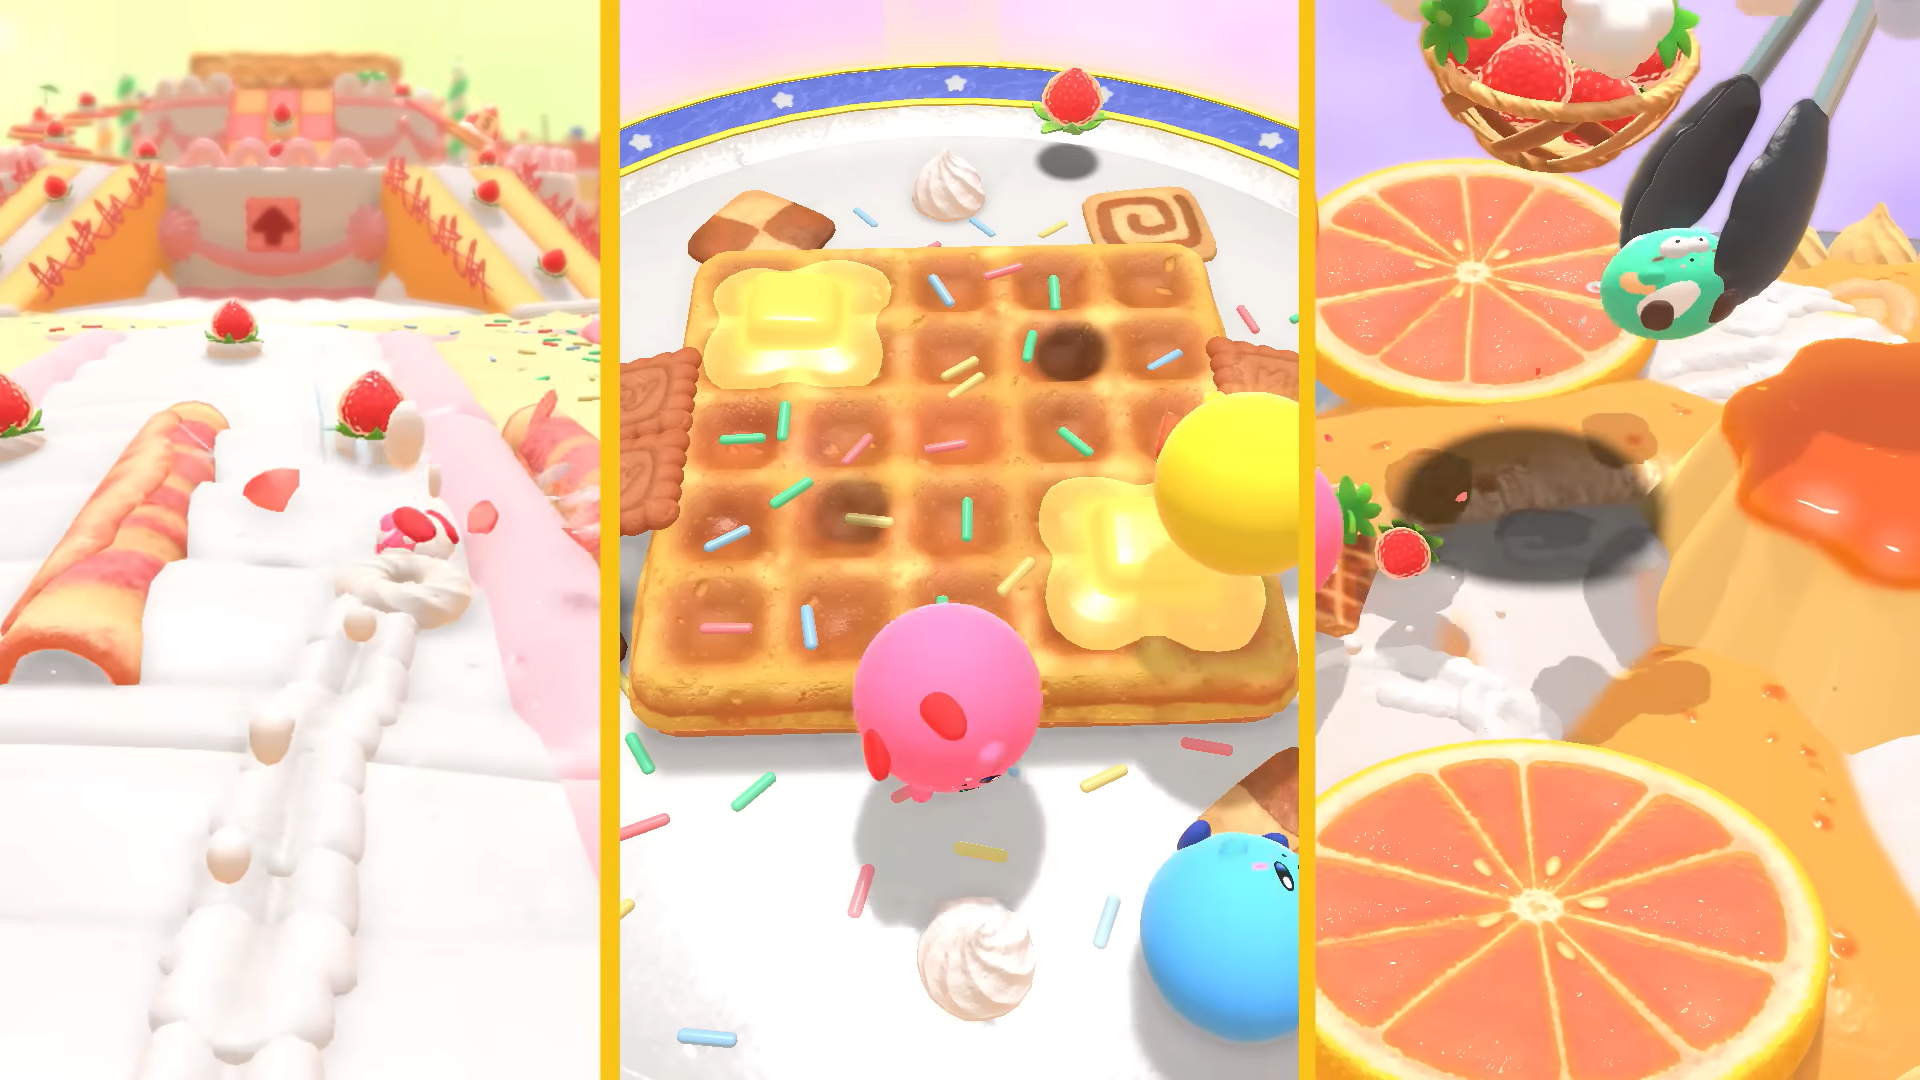 Kirby's Dream Buffet: How to Unlock New Costumes and Colors